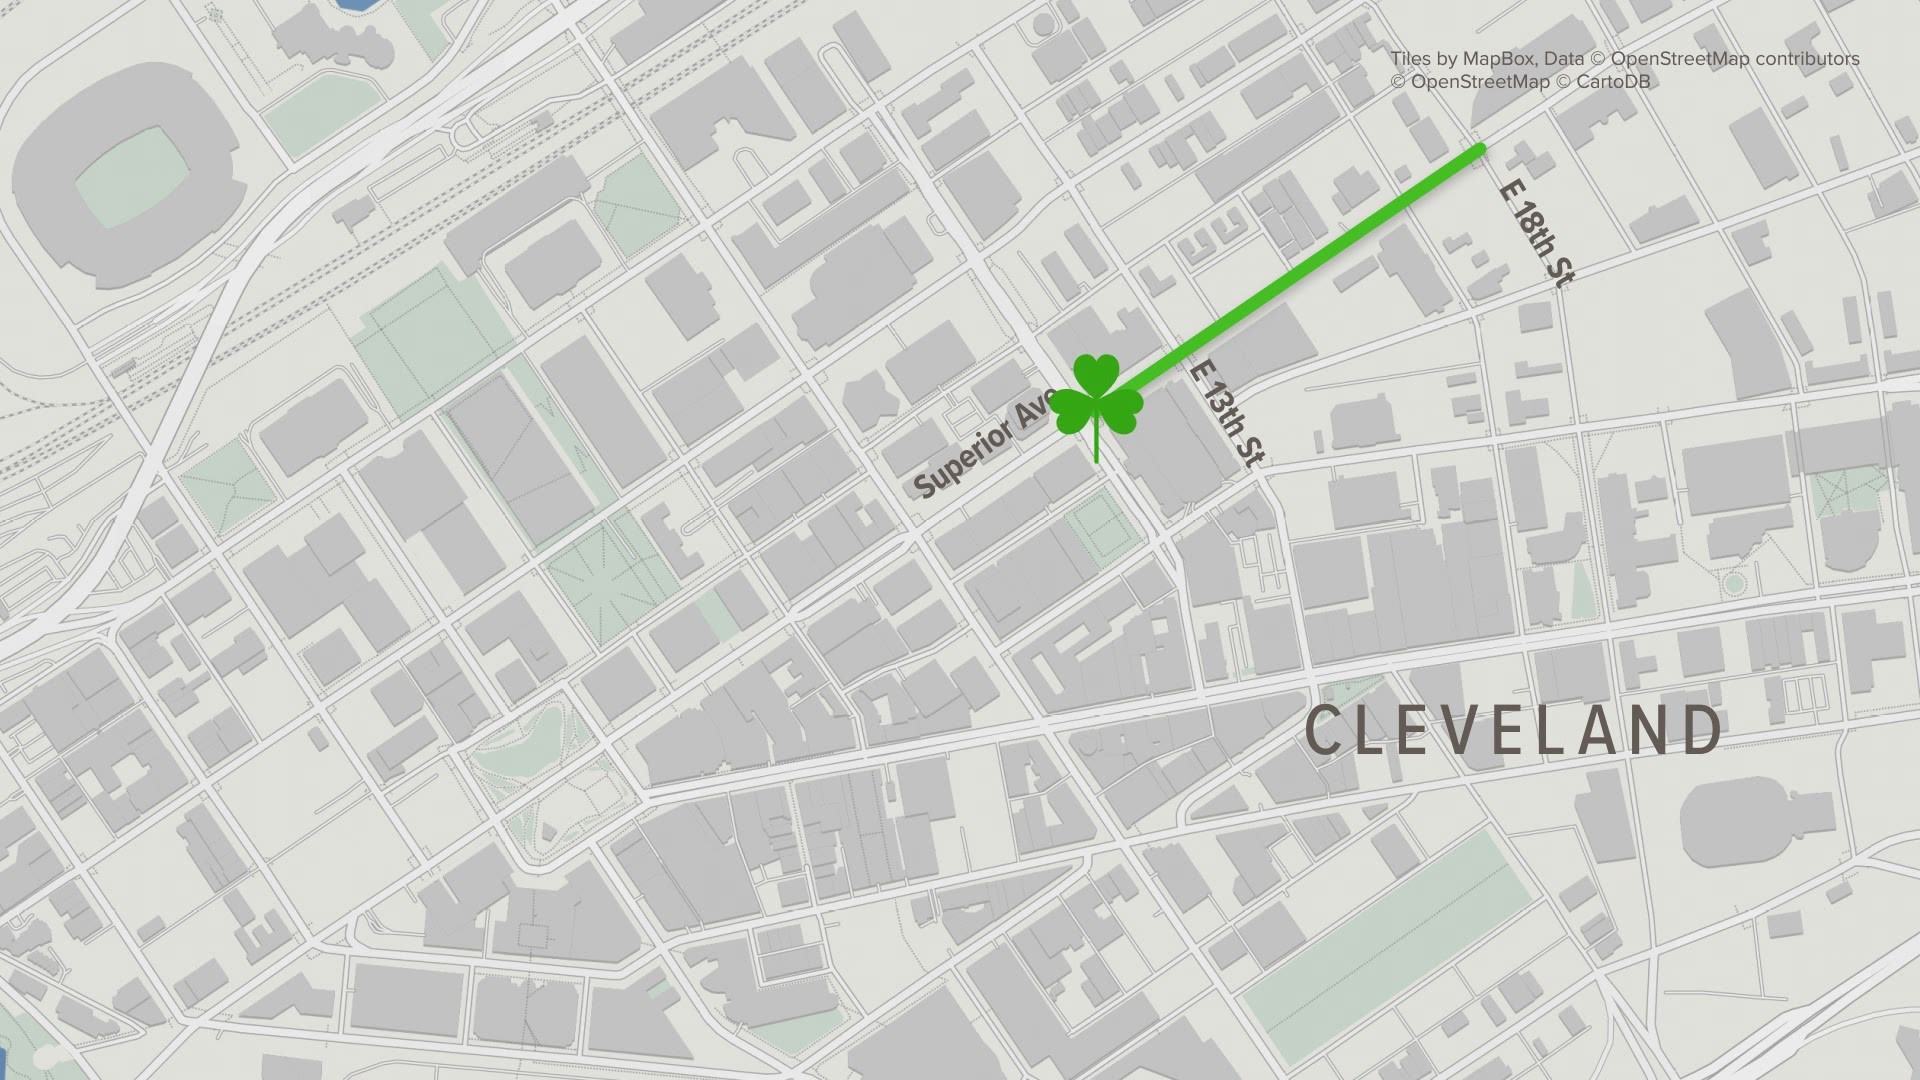 See the parade route for Cleveland's annual St. Patrick's Day celebration.